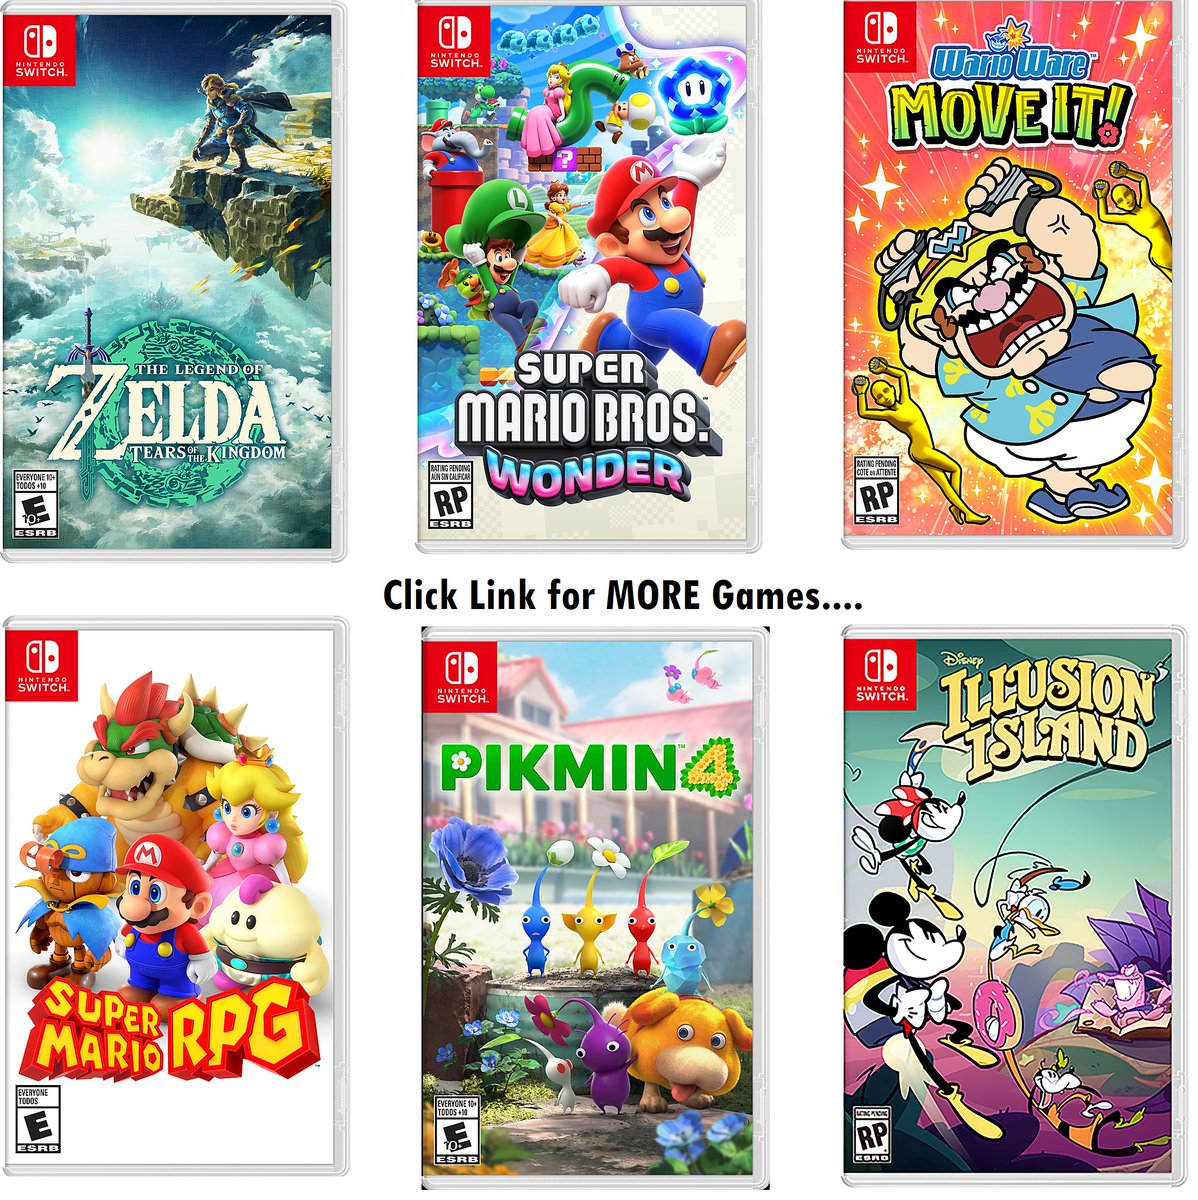 Nintendo Switch Video Games ⭐Buy 2 and Get 1 F R E E ⭐ Love the Selection! mavely.app.link/e/AY8BIaAT1Ab ad #NintendoSwitch #videogames #gamers #deals